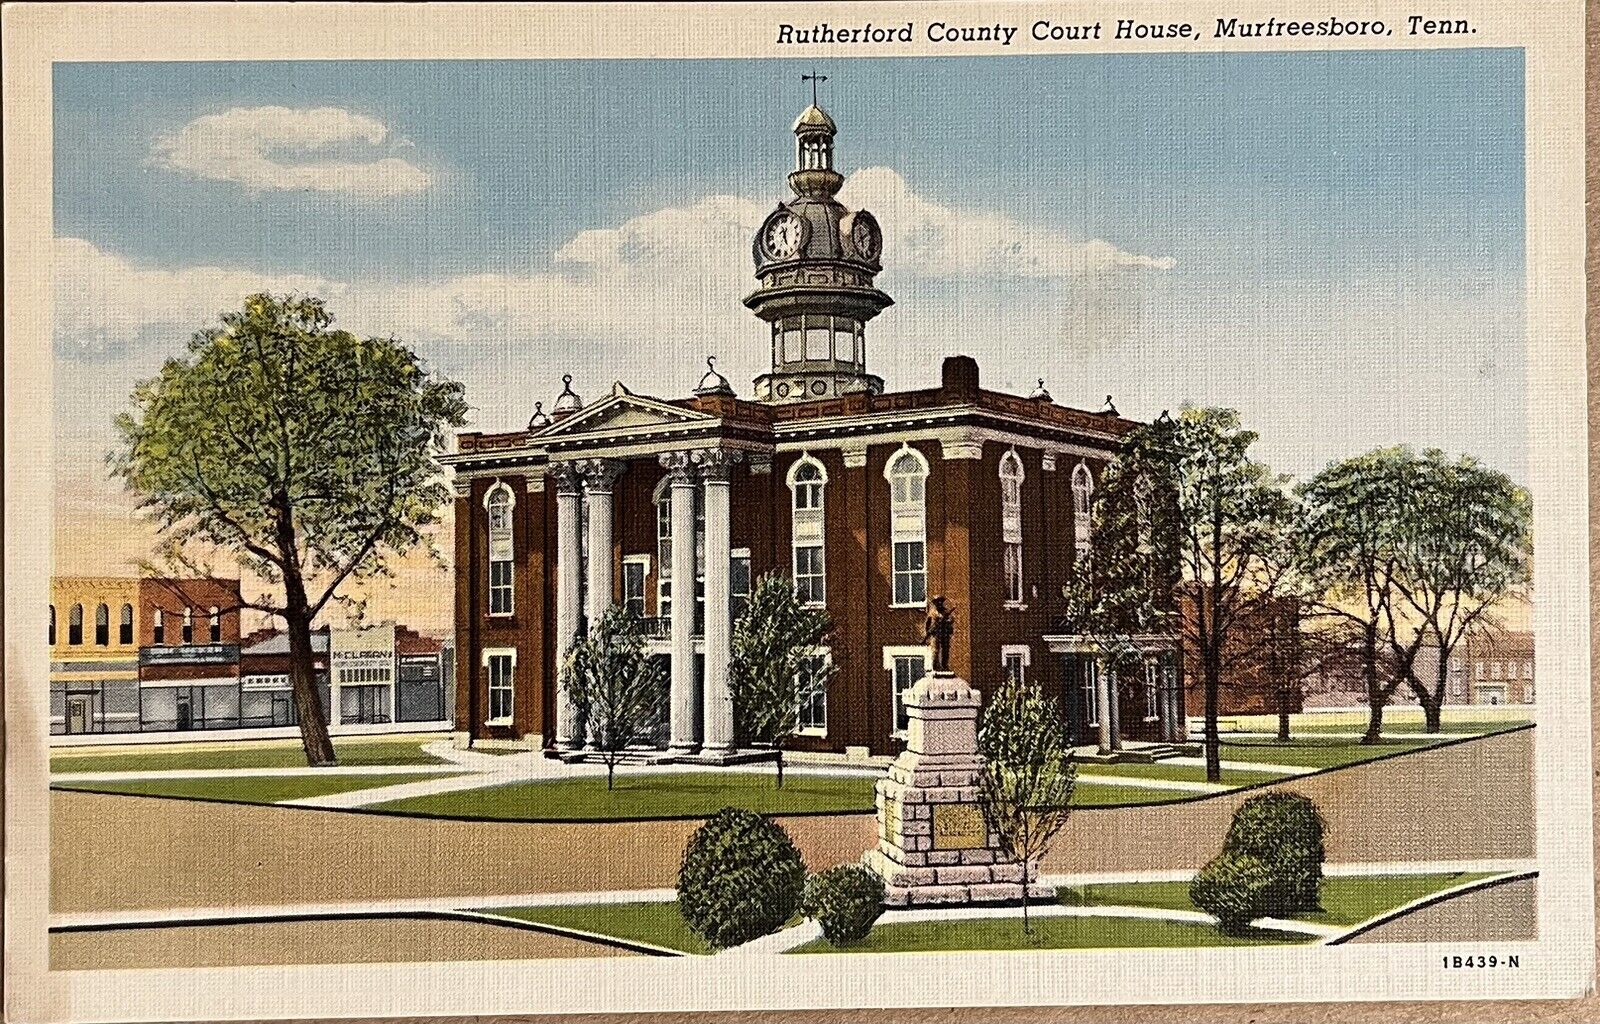 Murfreesboro Tennessee Rutherford County Court House Vintage Postcard c1940